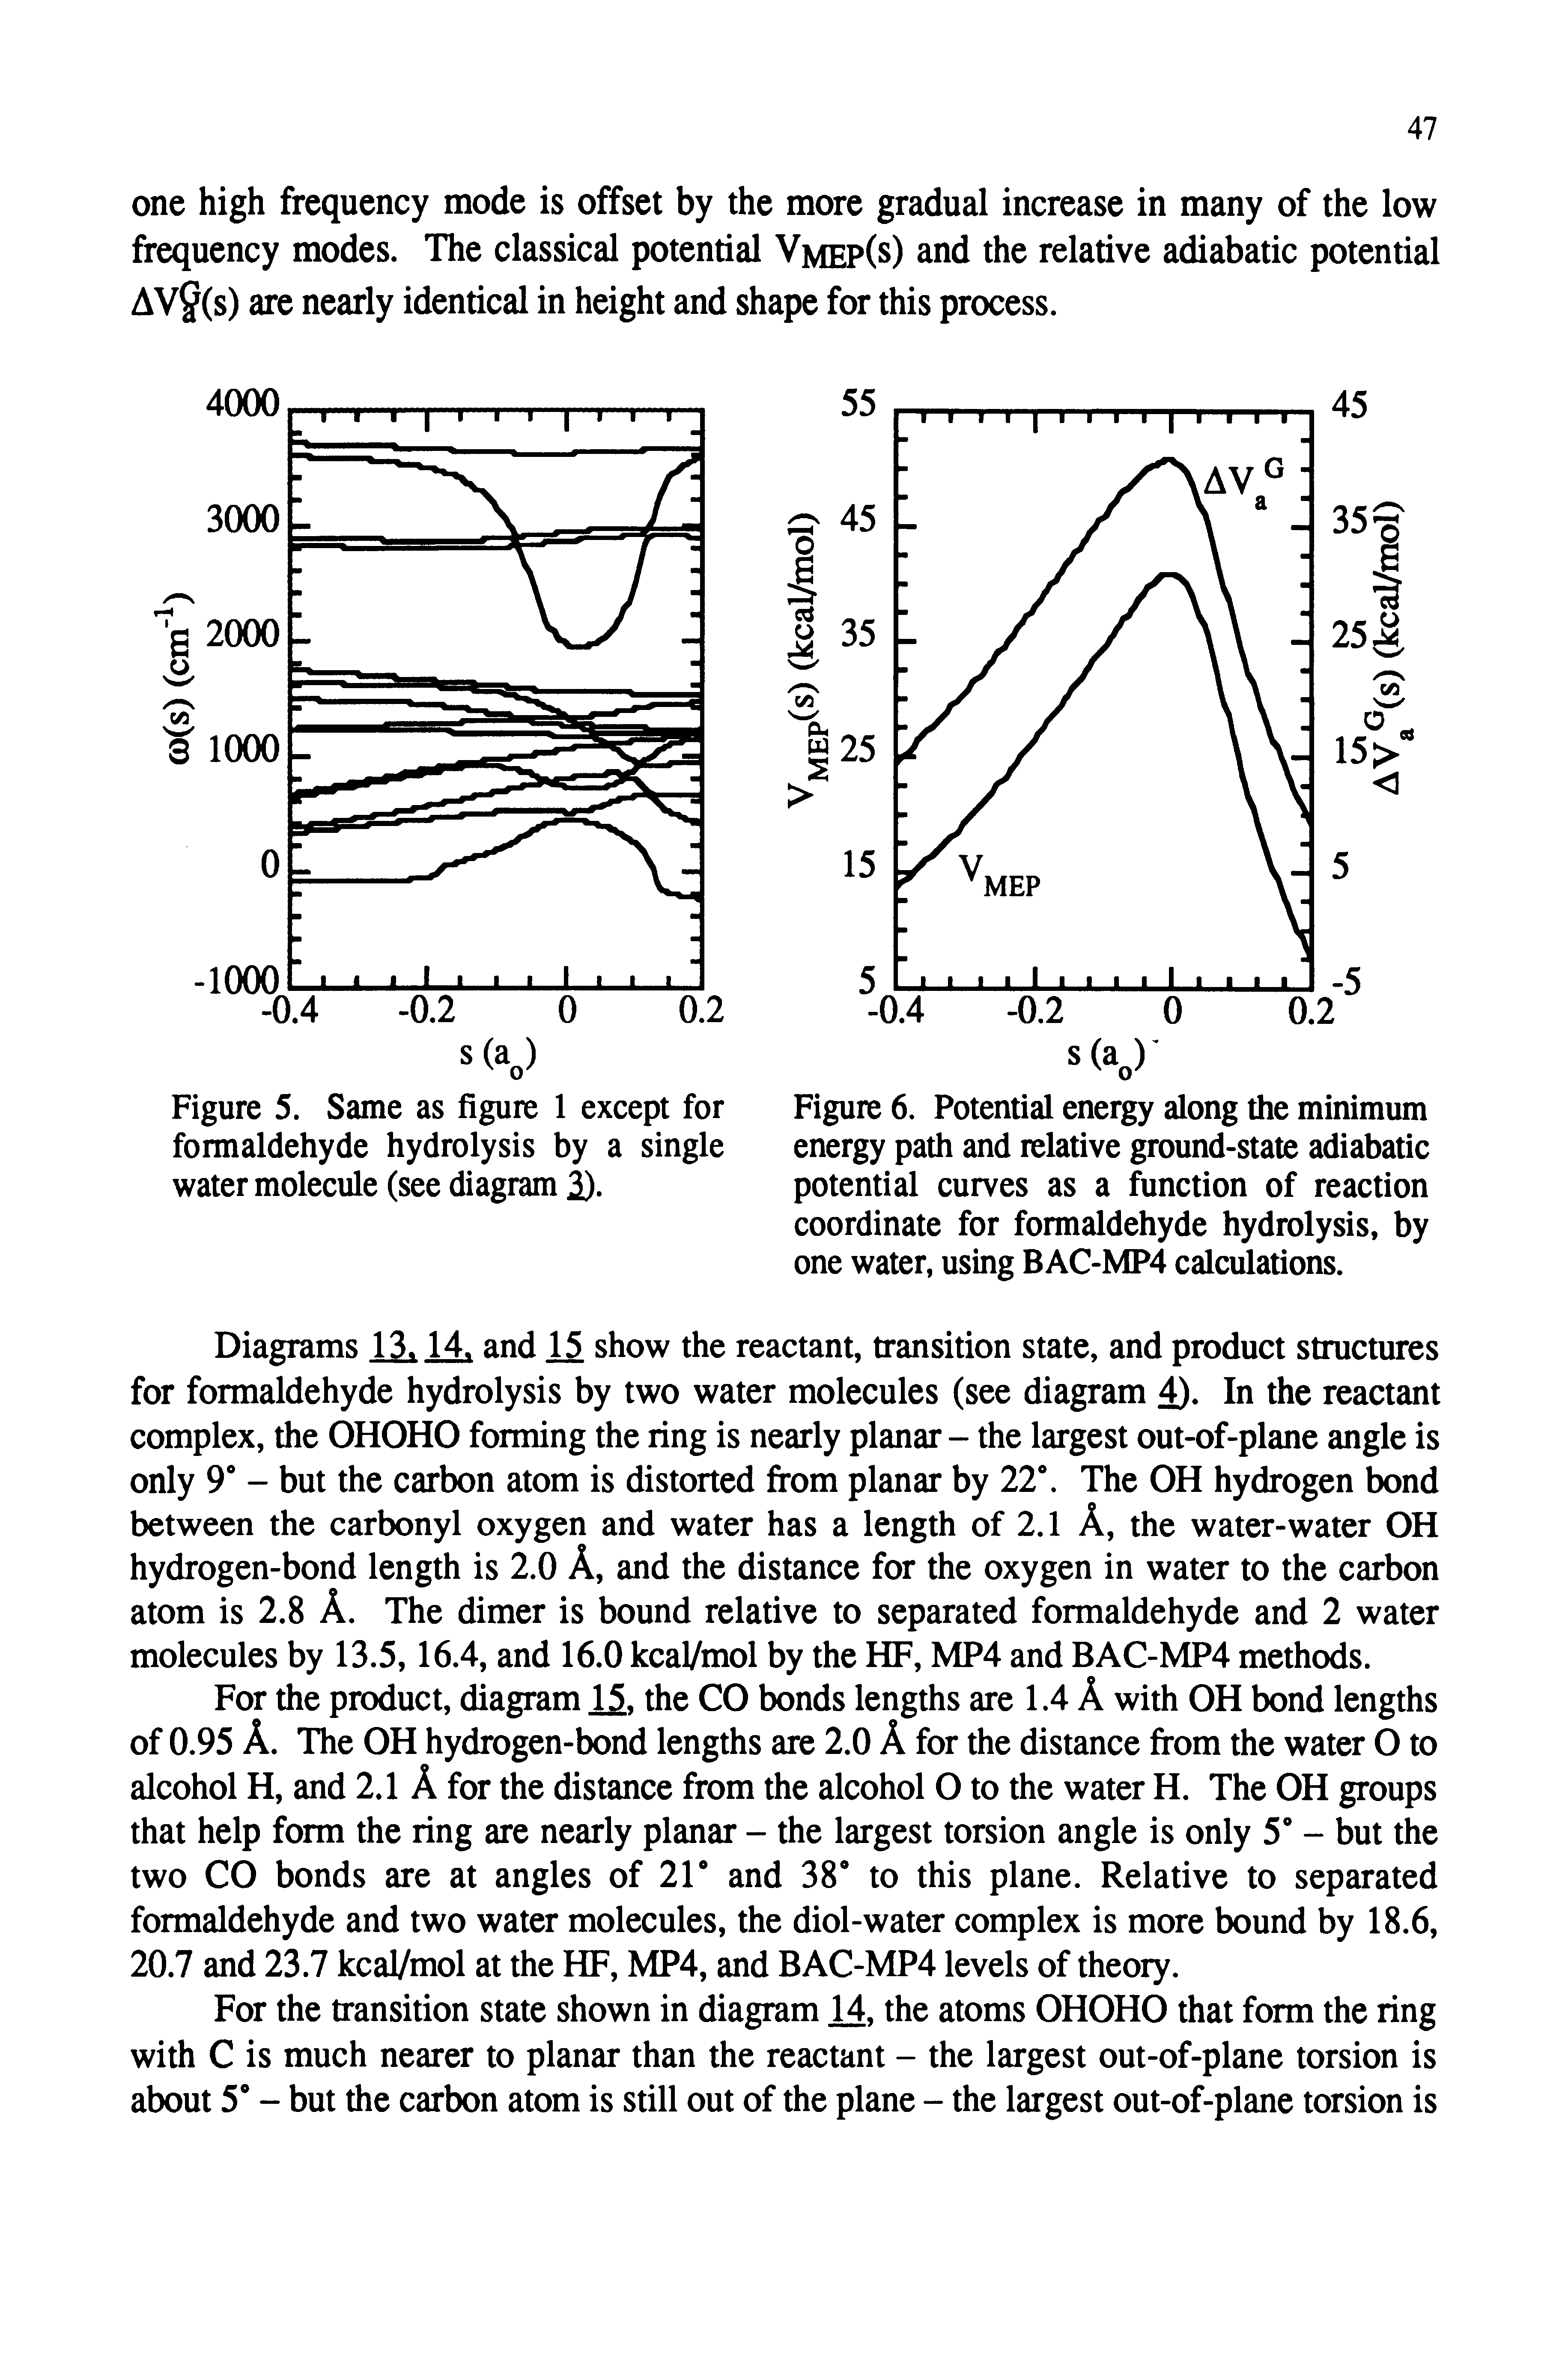 Figure 6. Potential energy along the minimiun energy path and relative groimd-state adiabatic potential curves as a function of reaction coordinate for formaldehyde hydrolysis, by one water, using BAC-MP4 calculations.